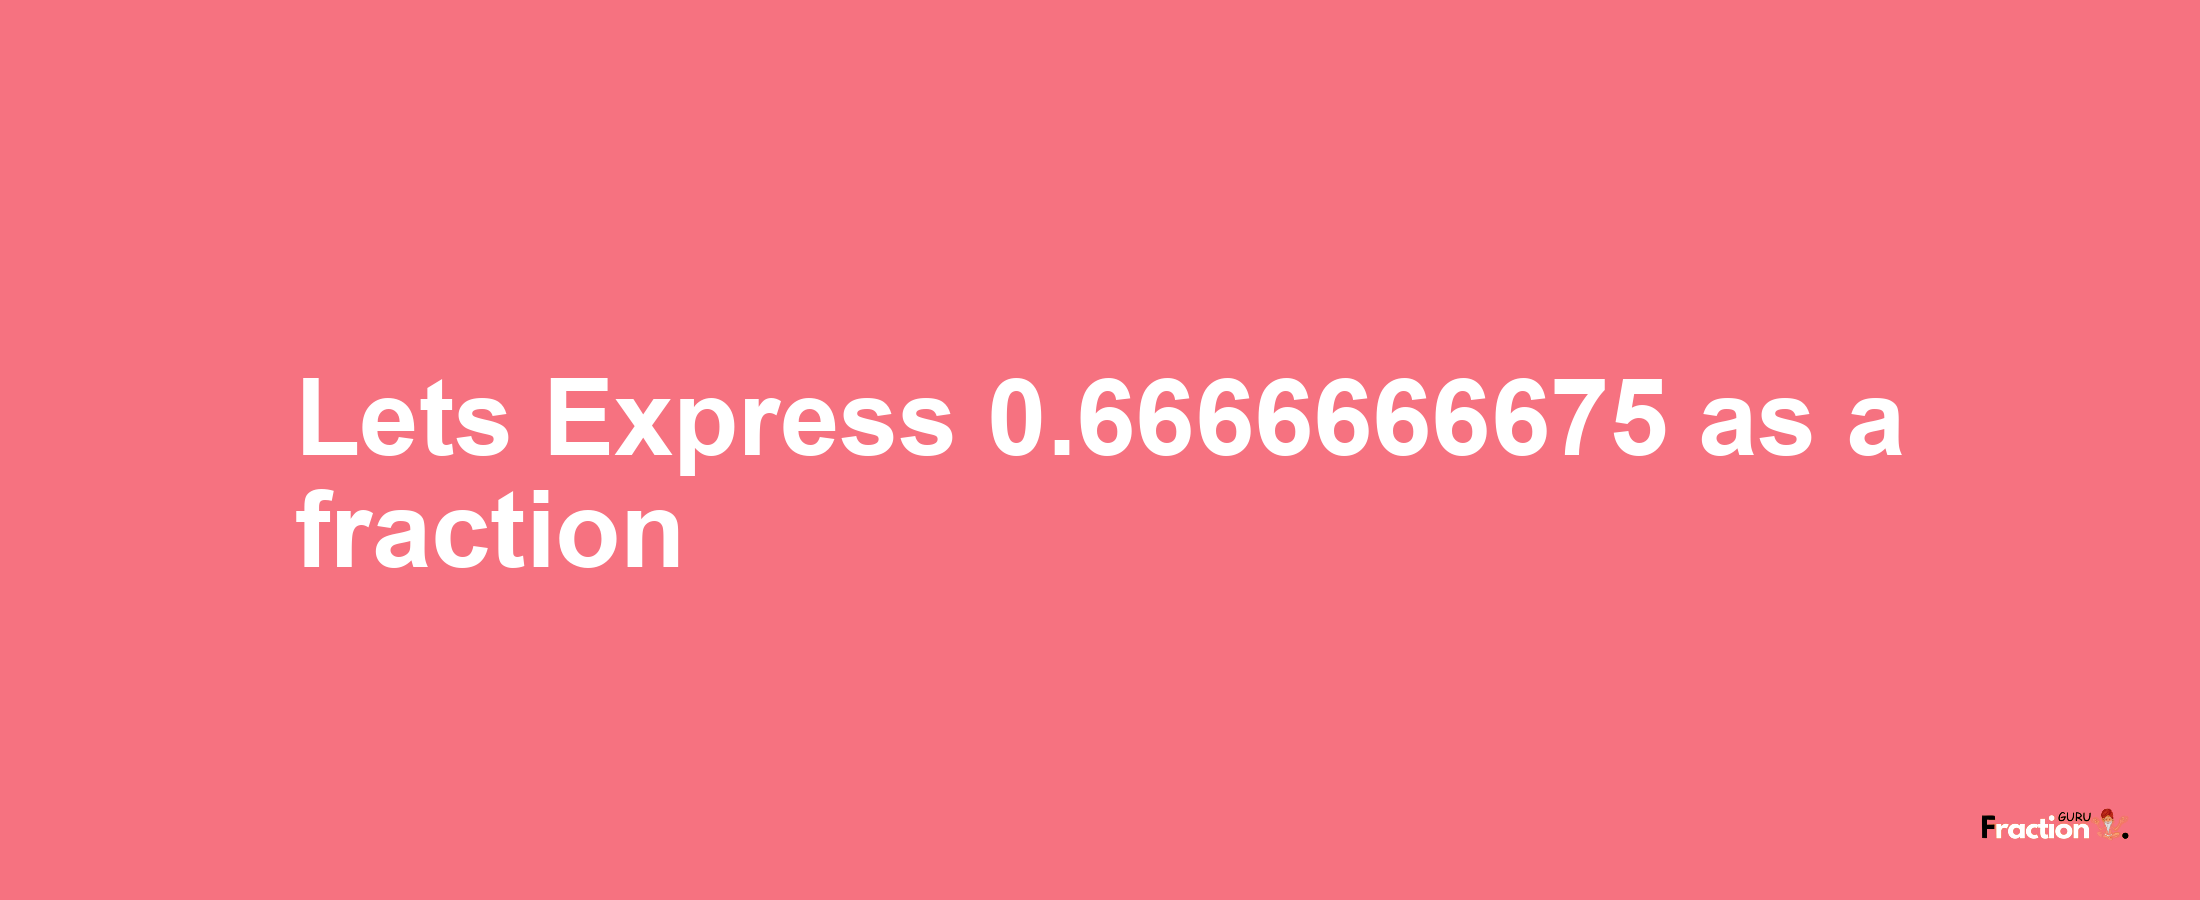 Lets Express 0.6666666675 as afraction